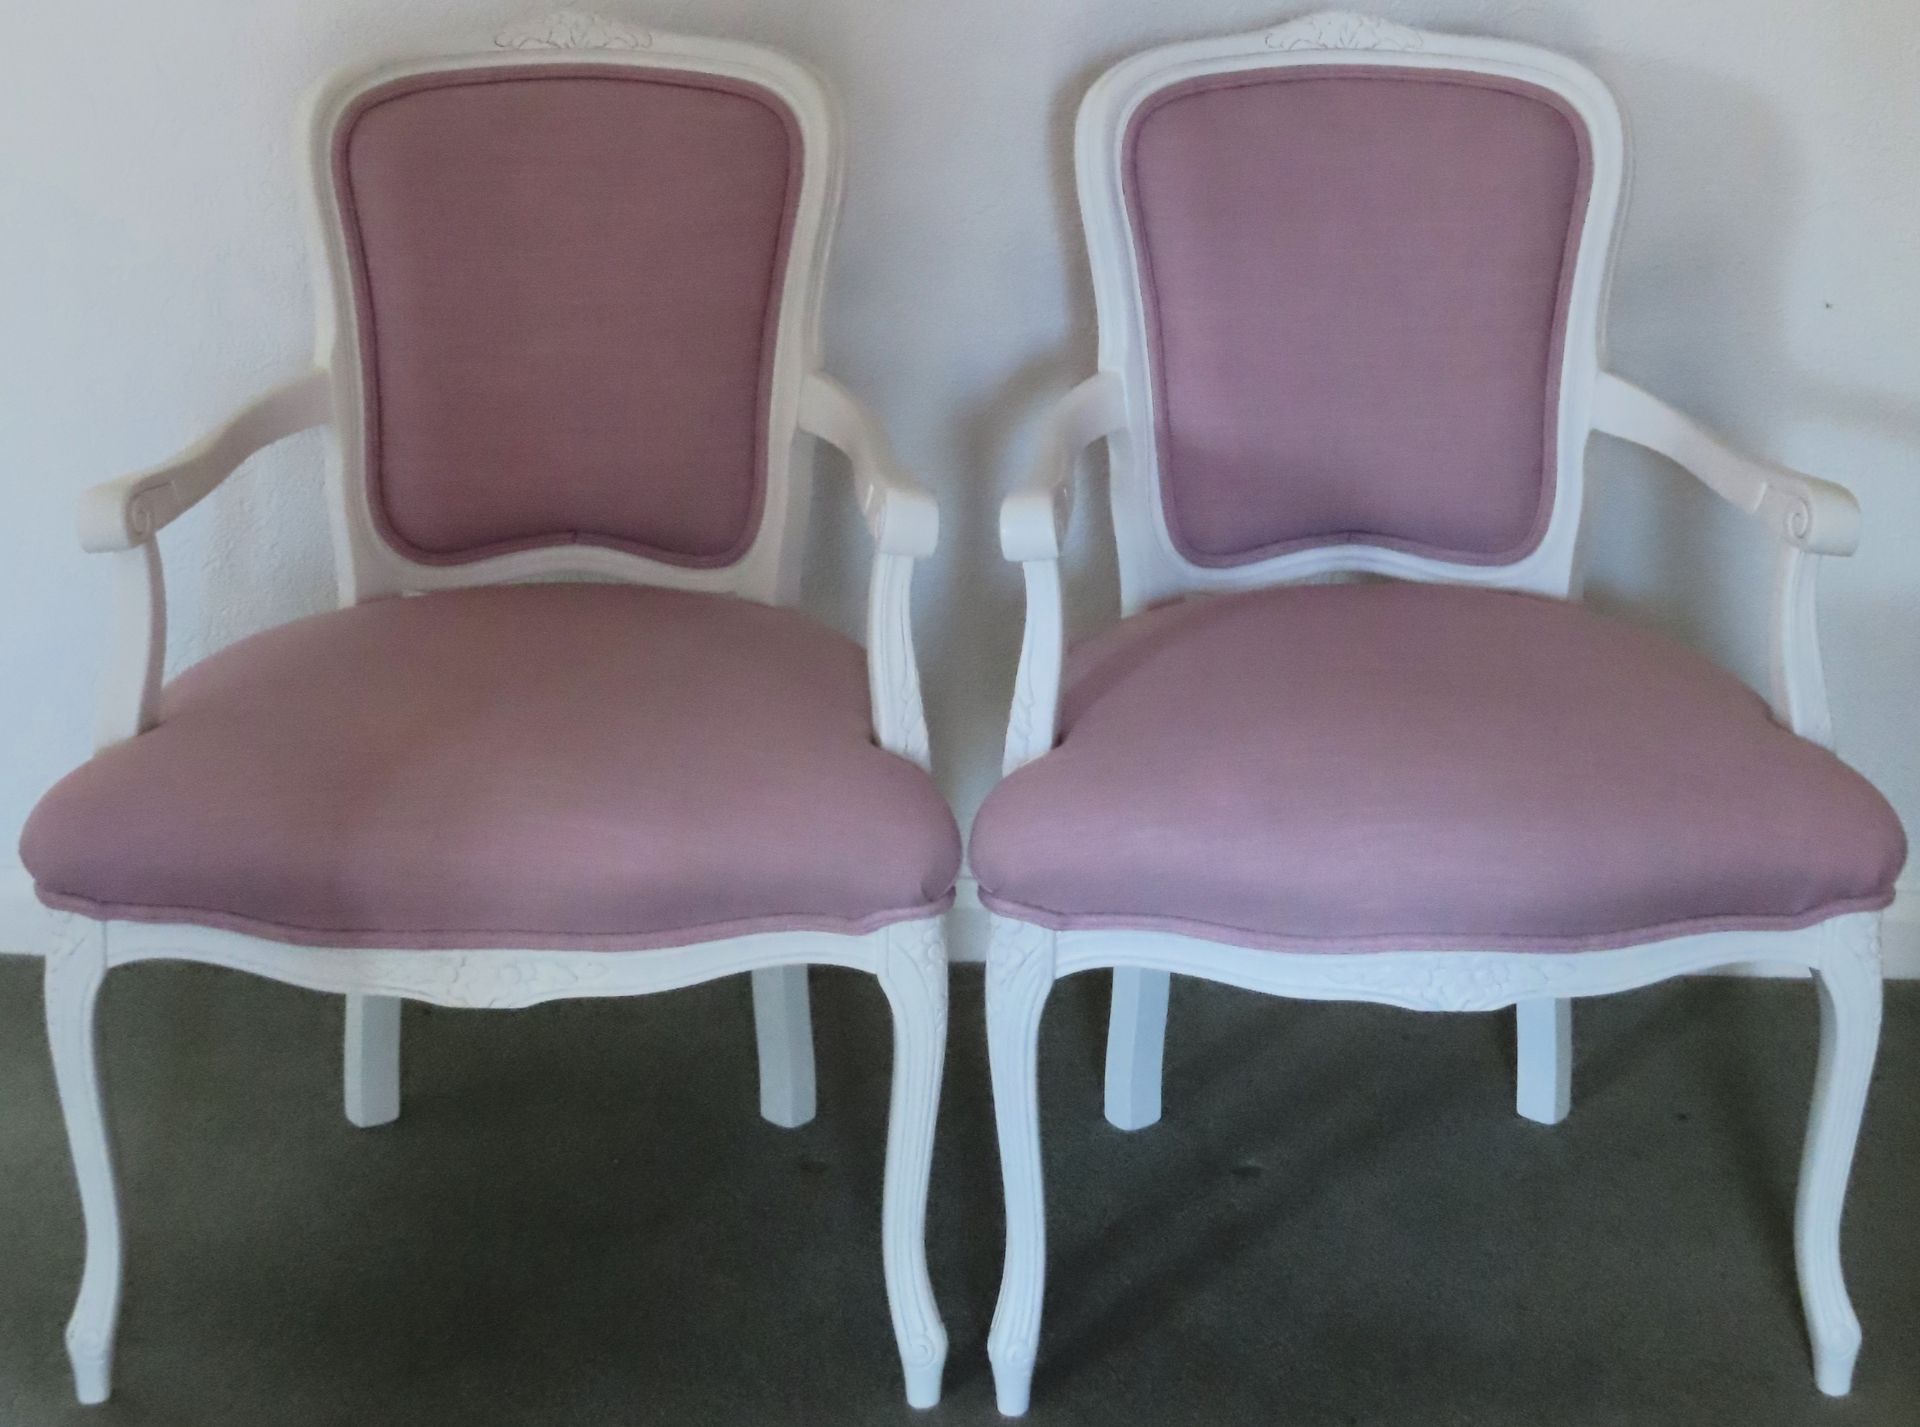 Pair of 20th century French style white painted & upholstered salon style armchairs. Approx. 89cms H